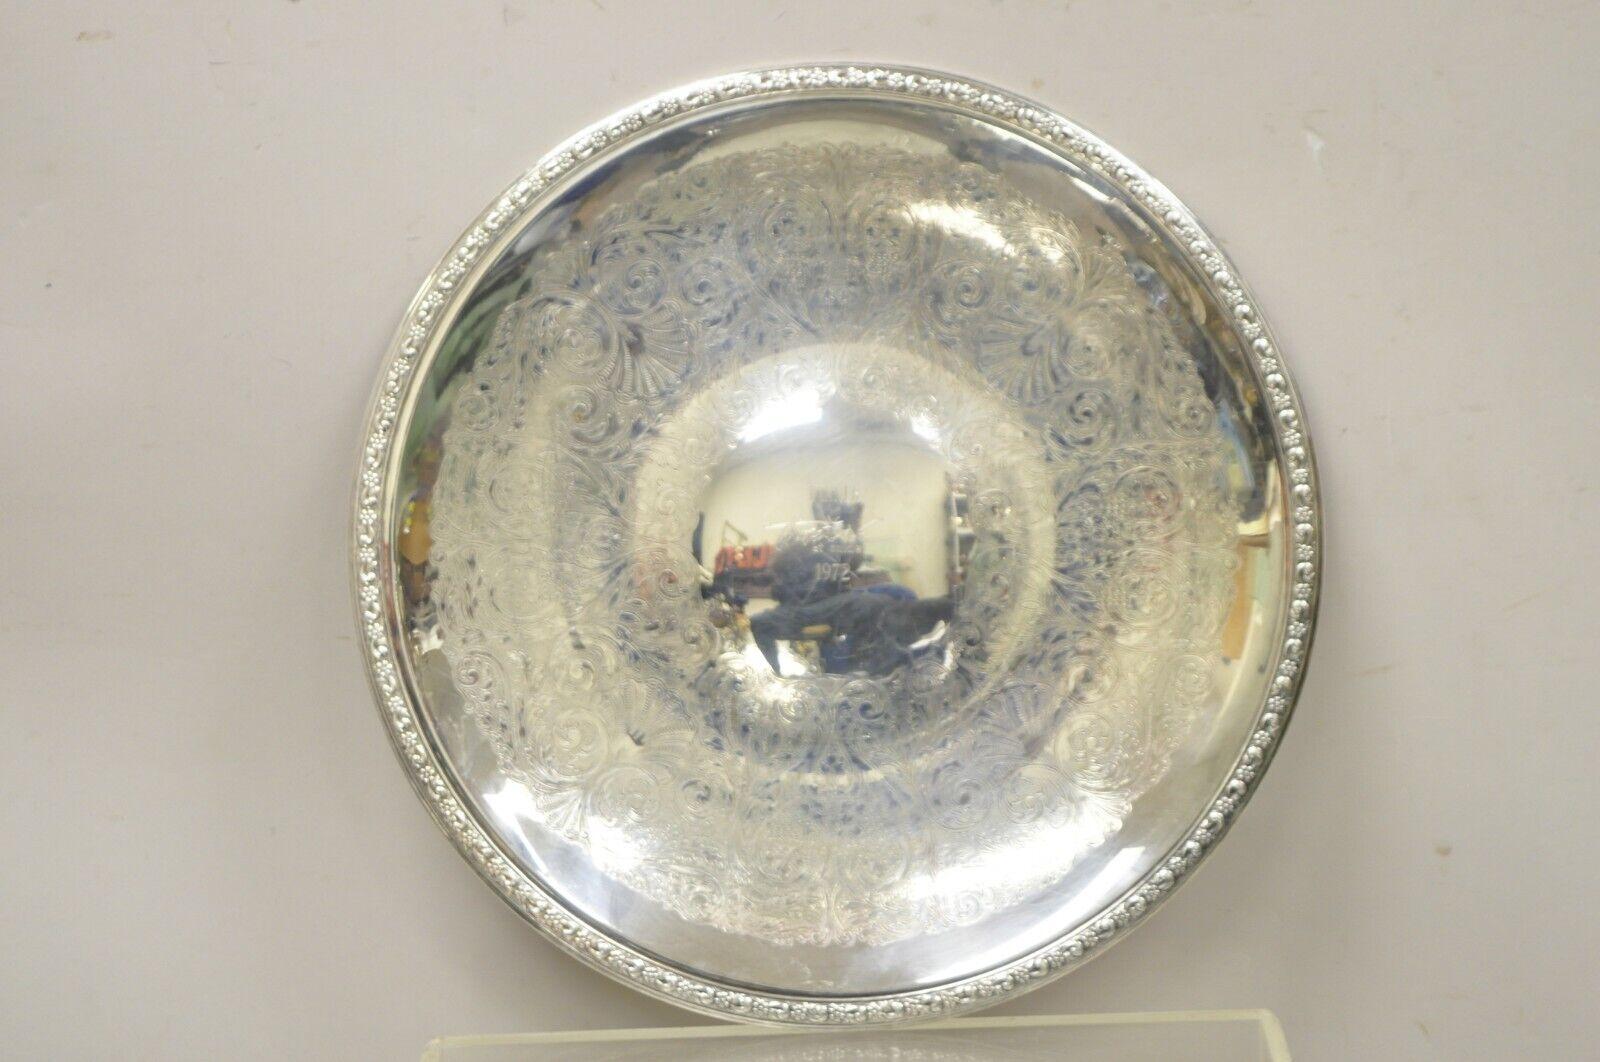 Vintage Sheridan 18” Round Award Platter Tray. Item features floral etching throughout, Original Hallmark, Center Engraved, “Winner Tropical at Calder 1972”. Circa Late 20th Century. Measurements:  1